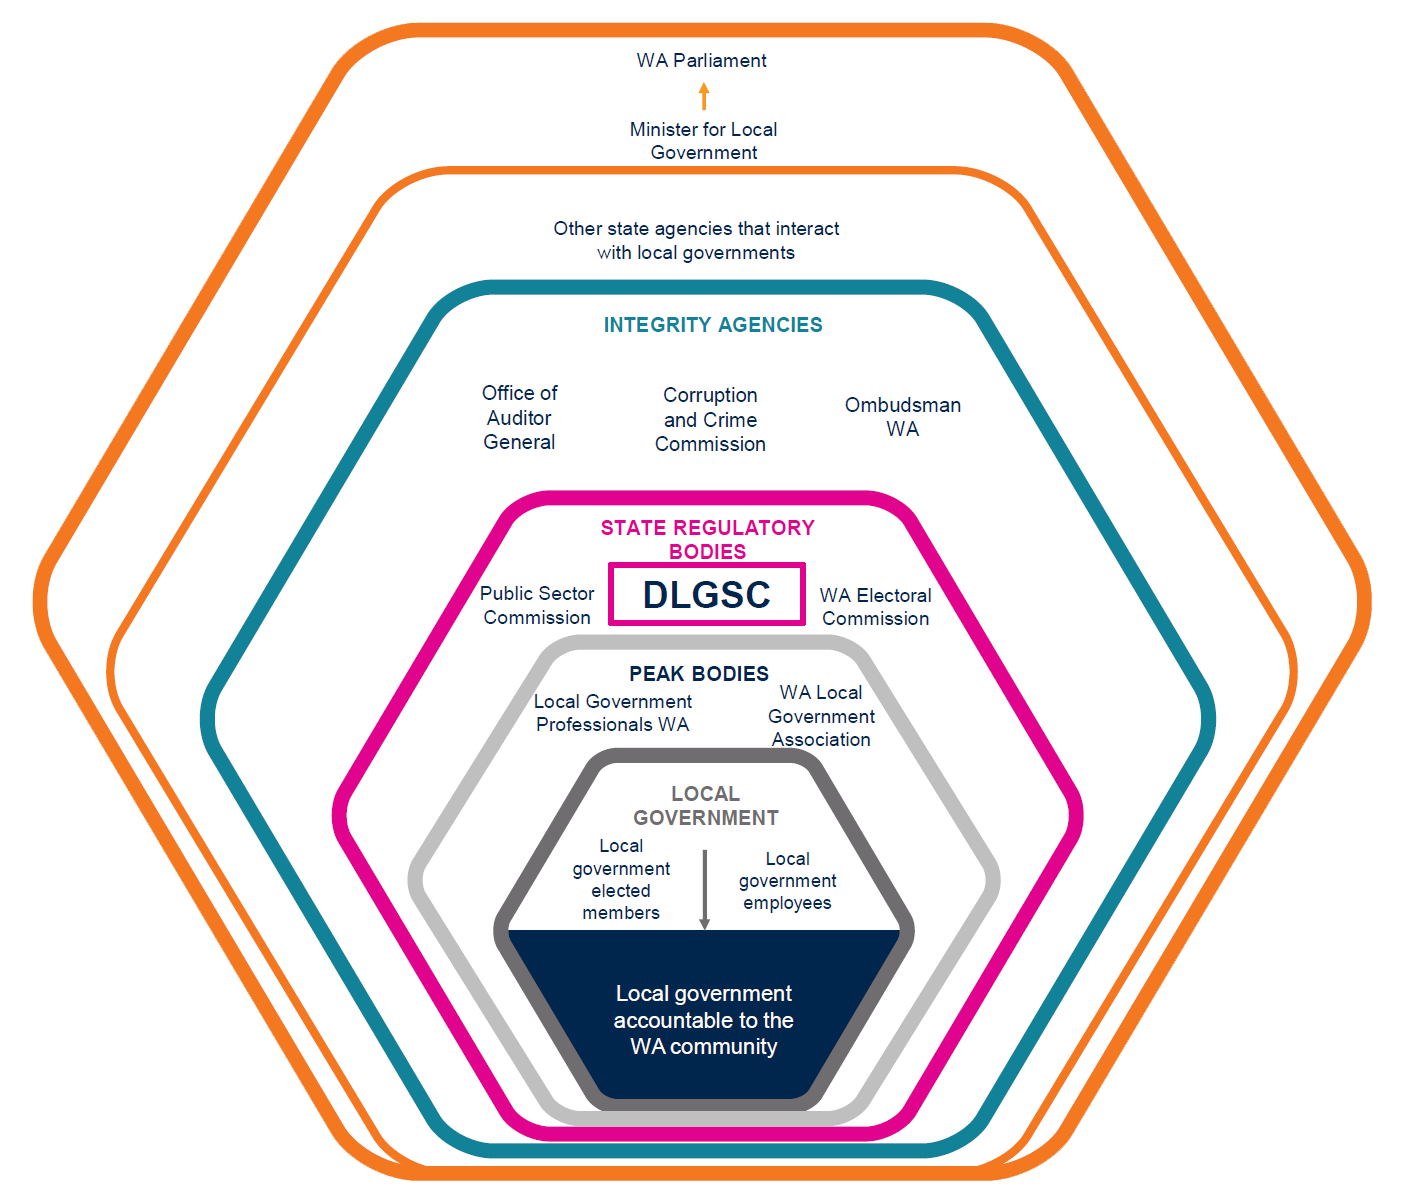 A layered hexagonal diagram beginning with the Minister for Local Government reporting to WA Parliament on the outer most hexagon. finishing with local government accountable to the WA community. Exact content of this diagram listed below this image.